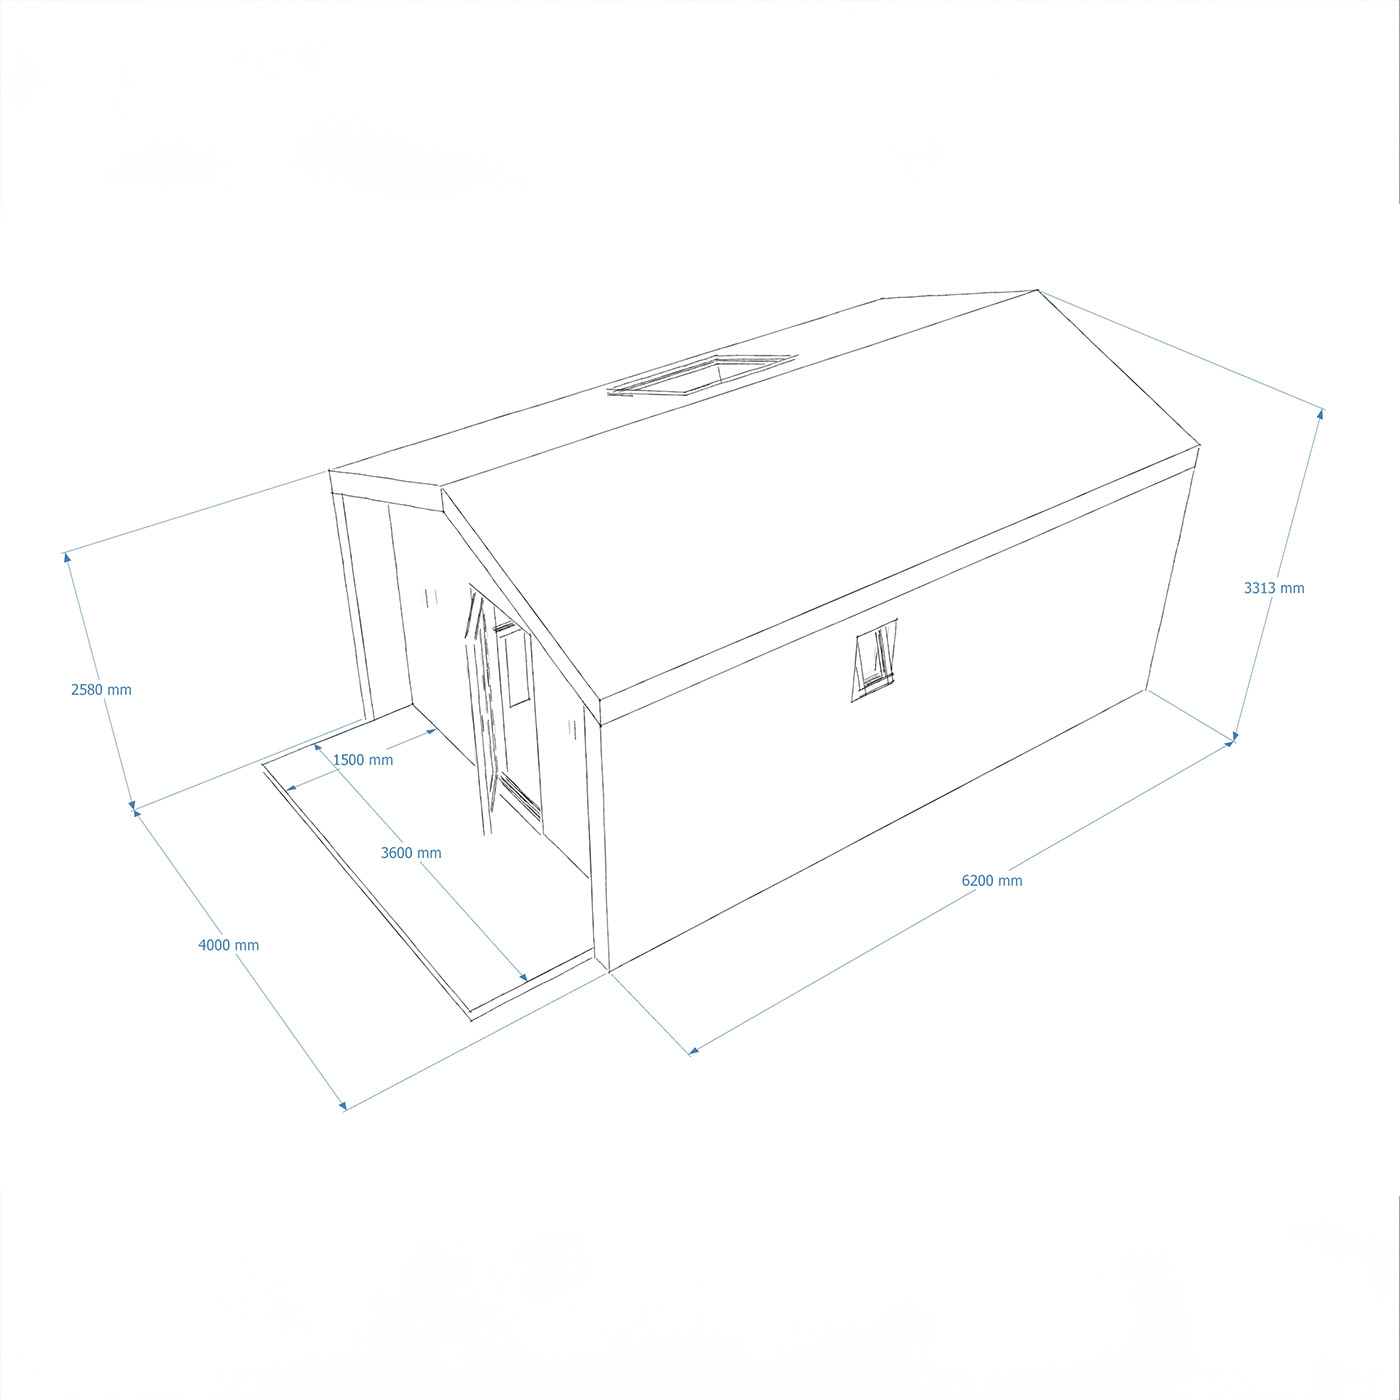 Exterior dimensions for 4.0m by 6.2m mobile home